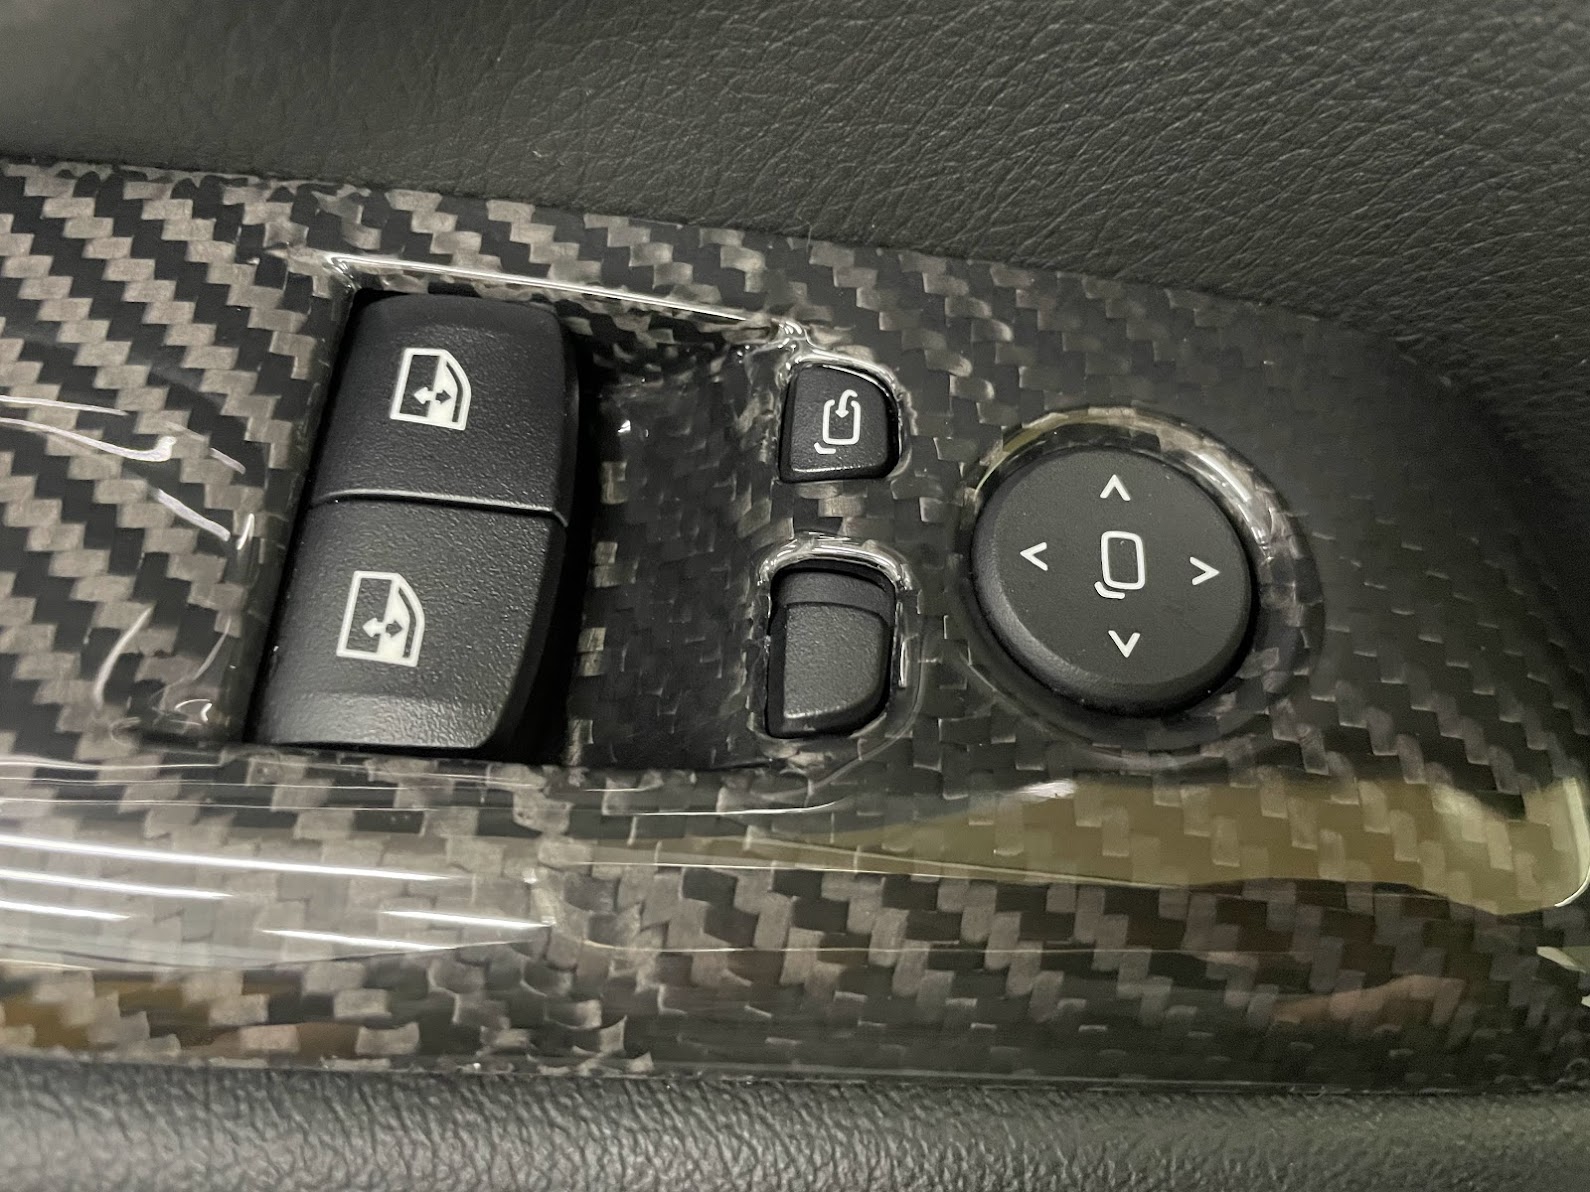 2020 up Toyota GR Supra A90 Carbon door switch covers (LHD)